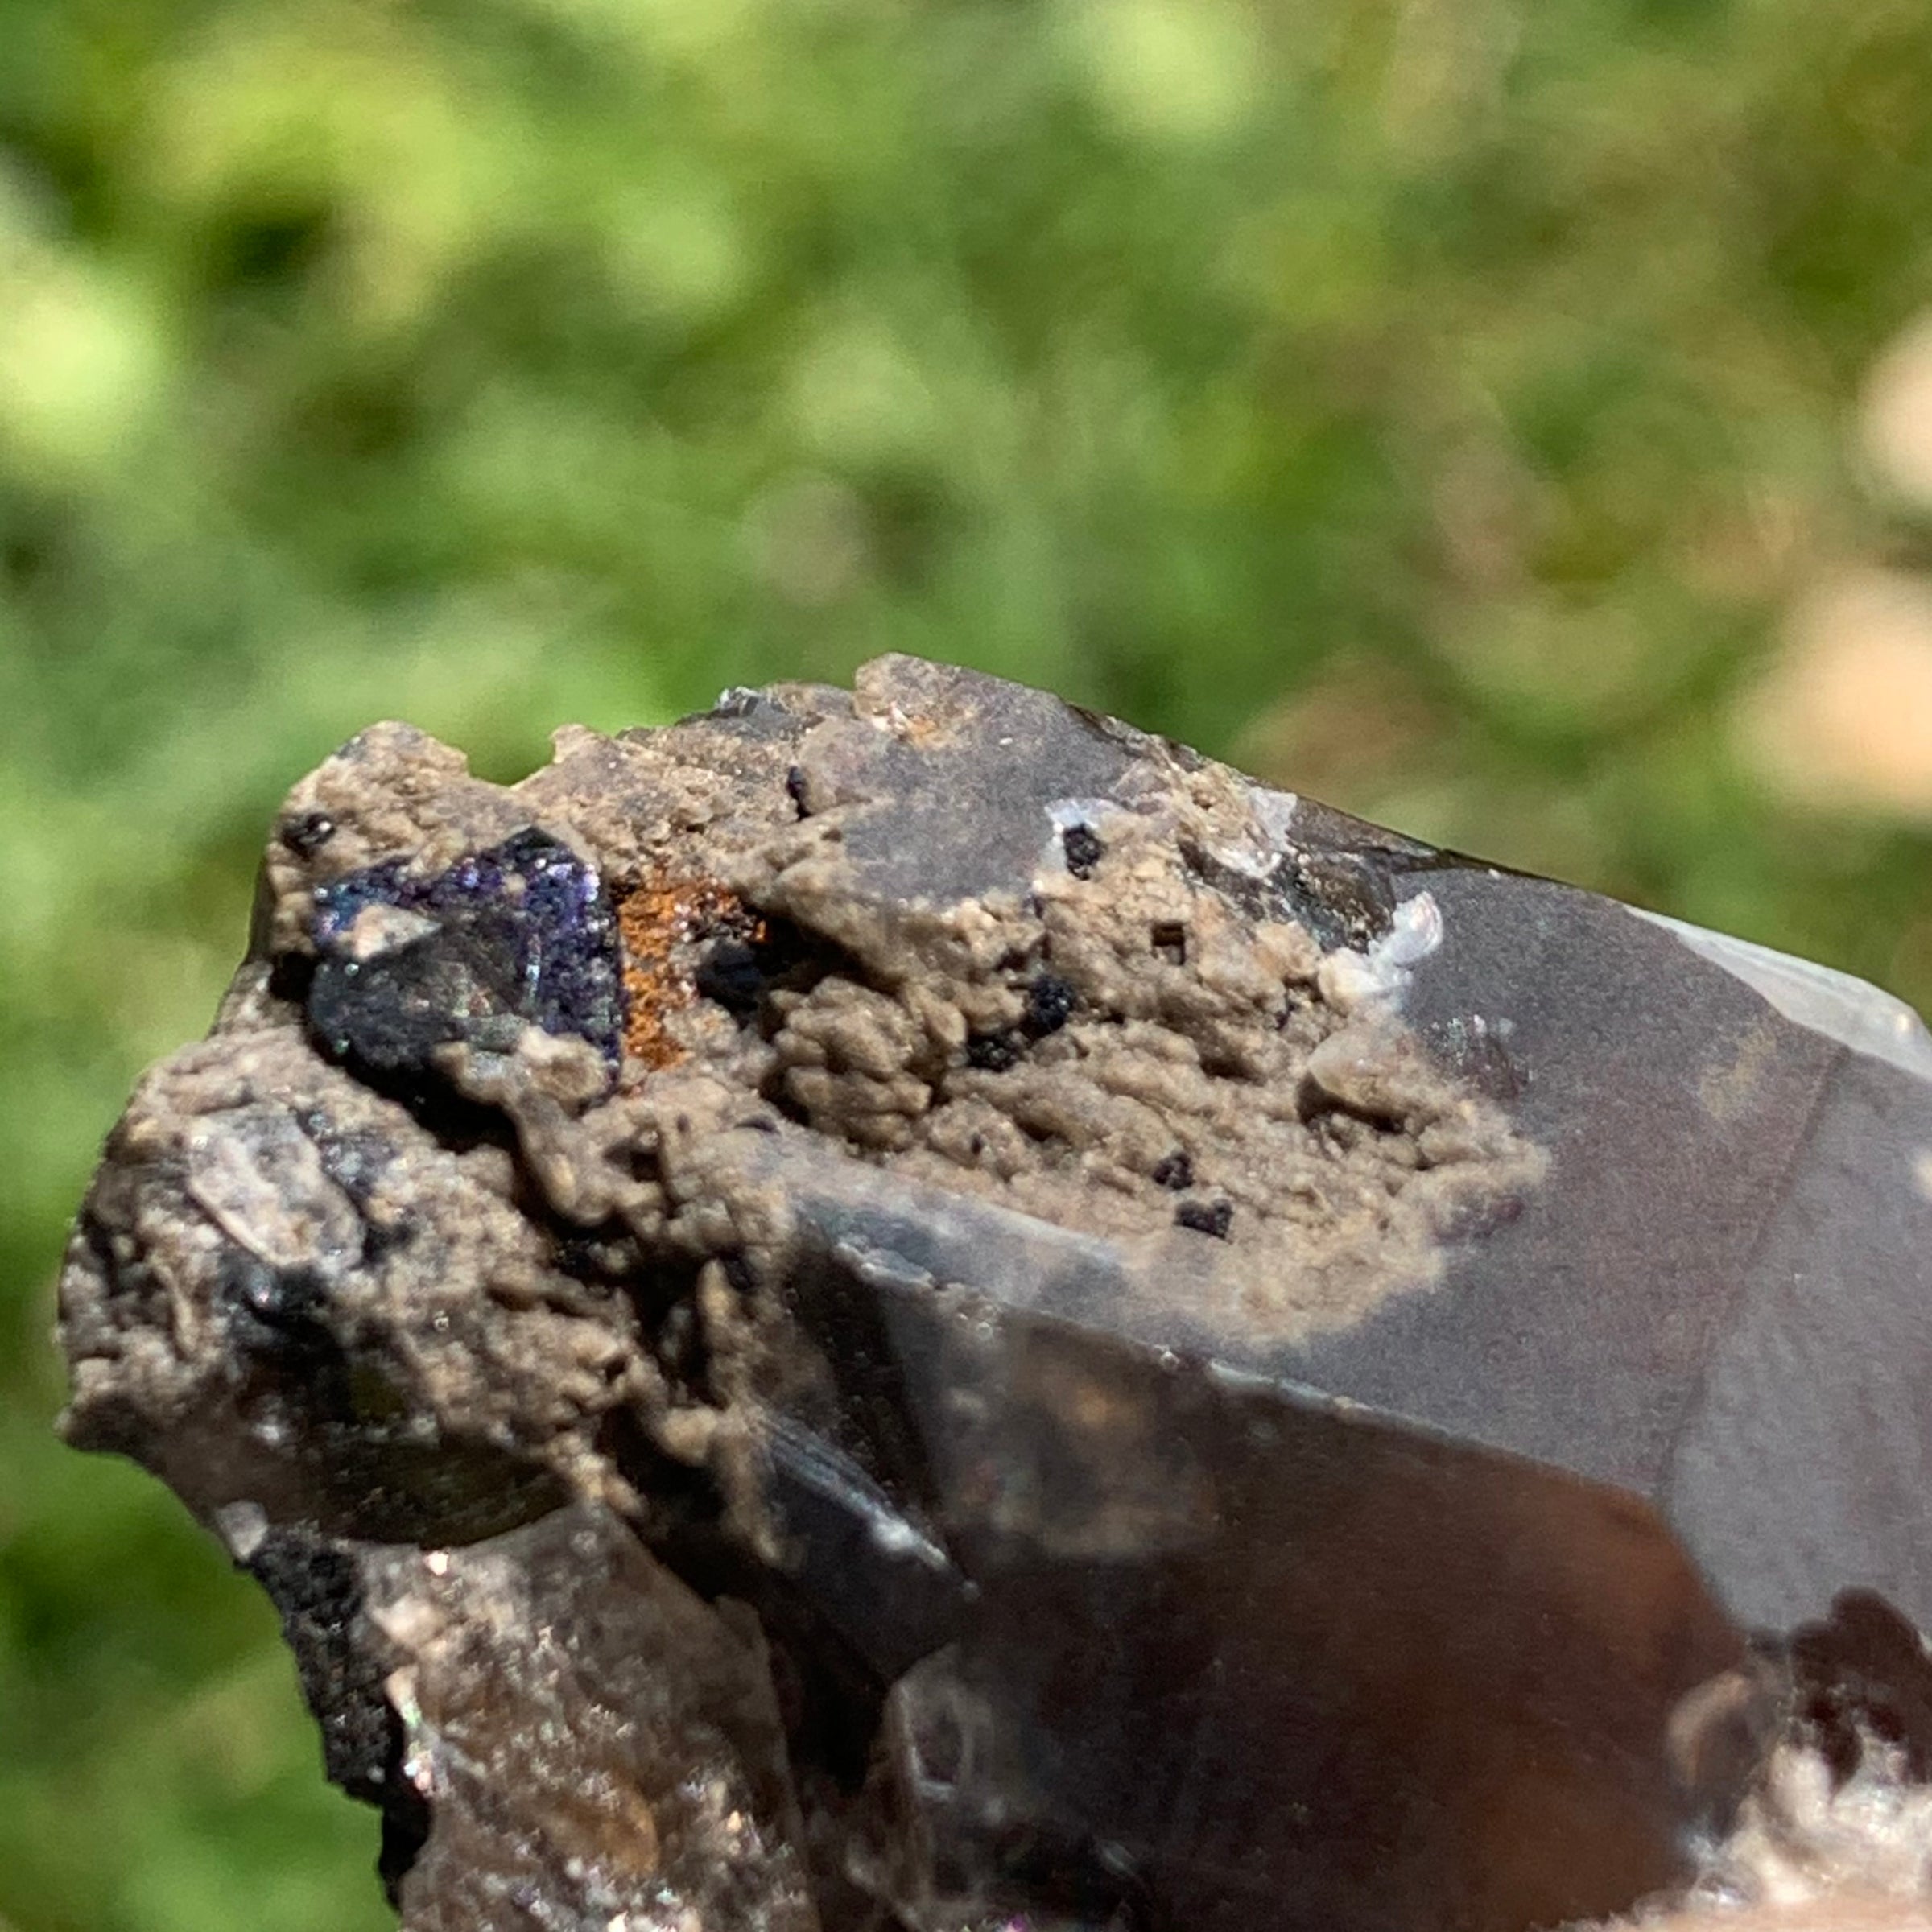 small and tiny brookite crystals on a smokey quartz point held in hand against a grassy backrgound